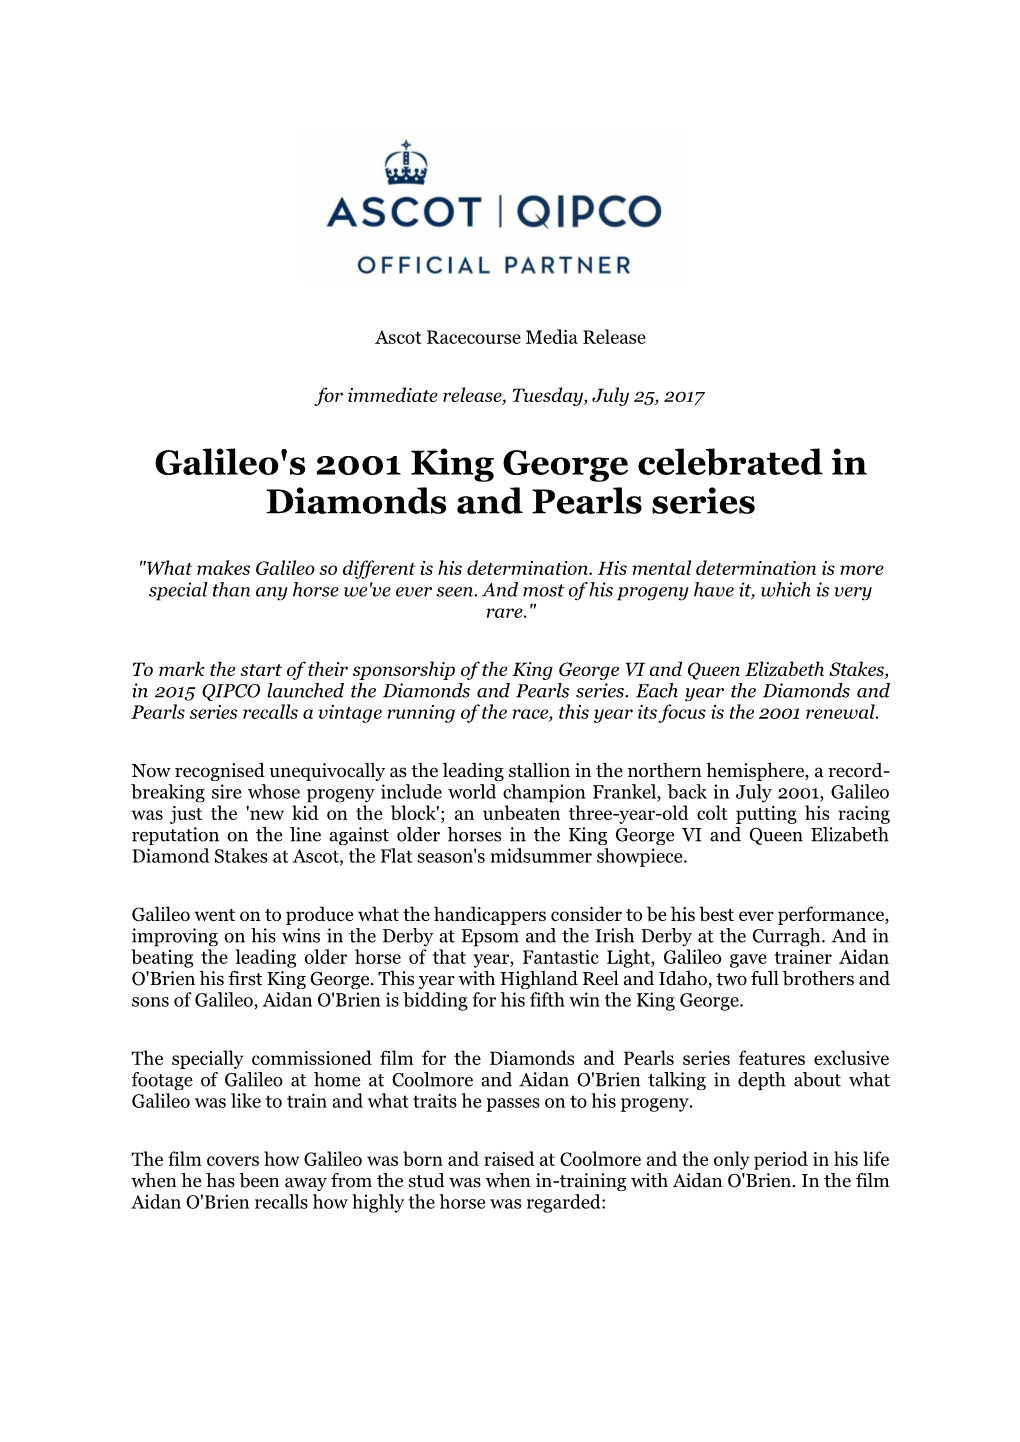 Galileo's 2001 King George Celebrated in Diamonds and Pearls Series